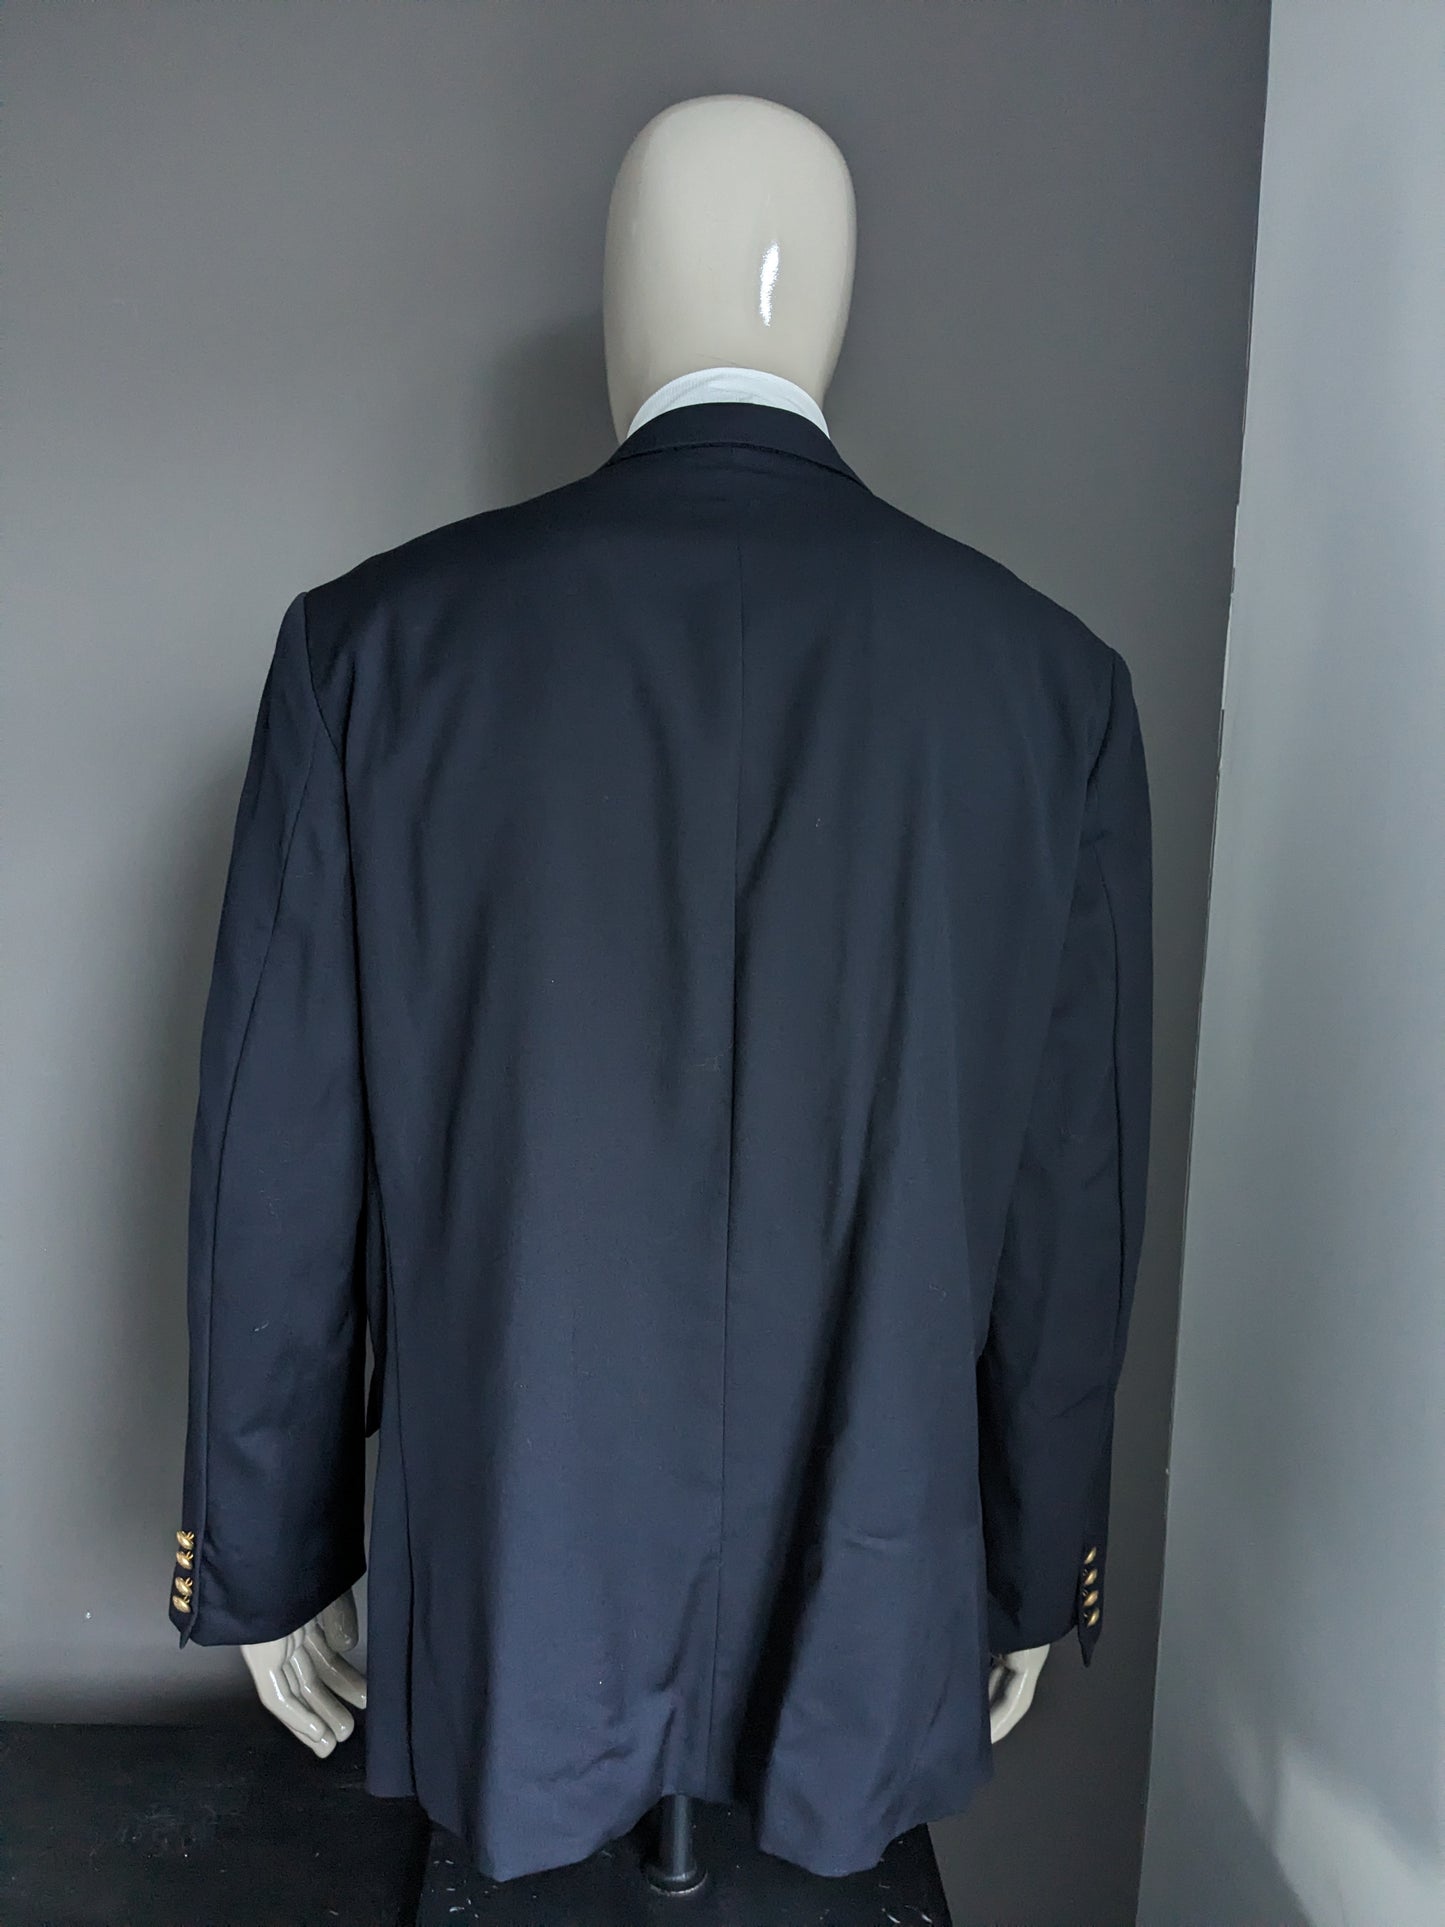 Vintage scapa woolen jacket with beautiful buttons. Dark blue colored. Size 58 / XL.